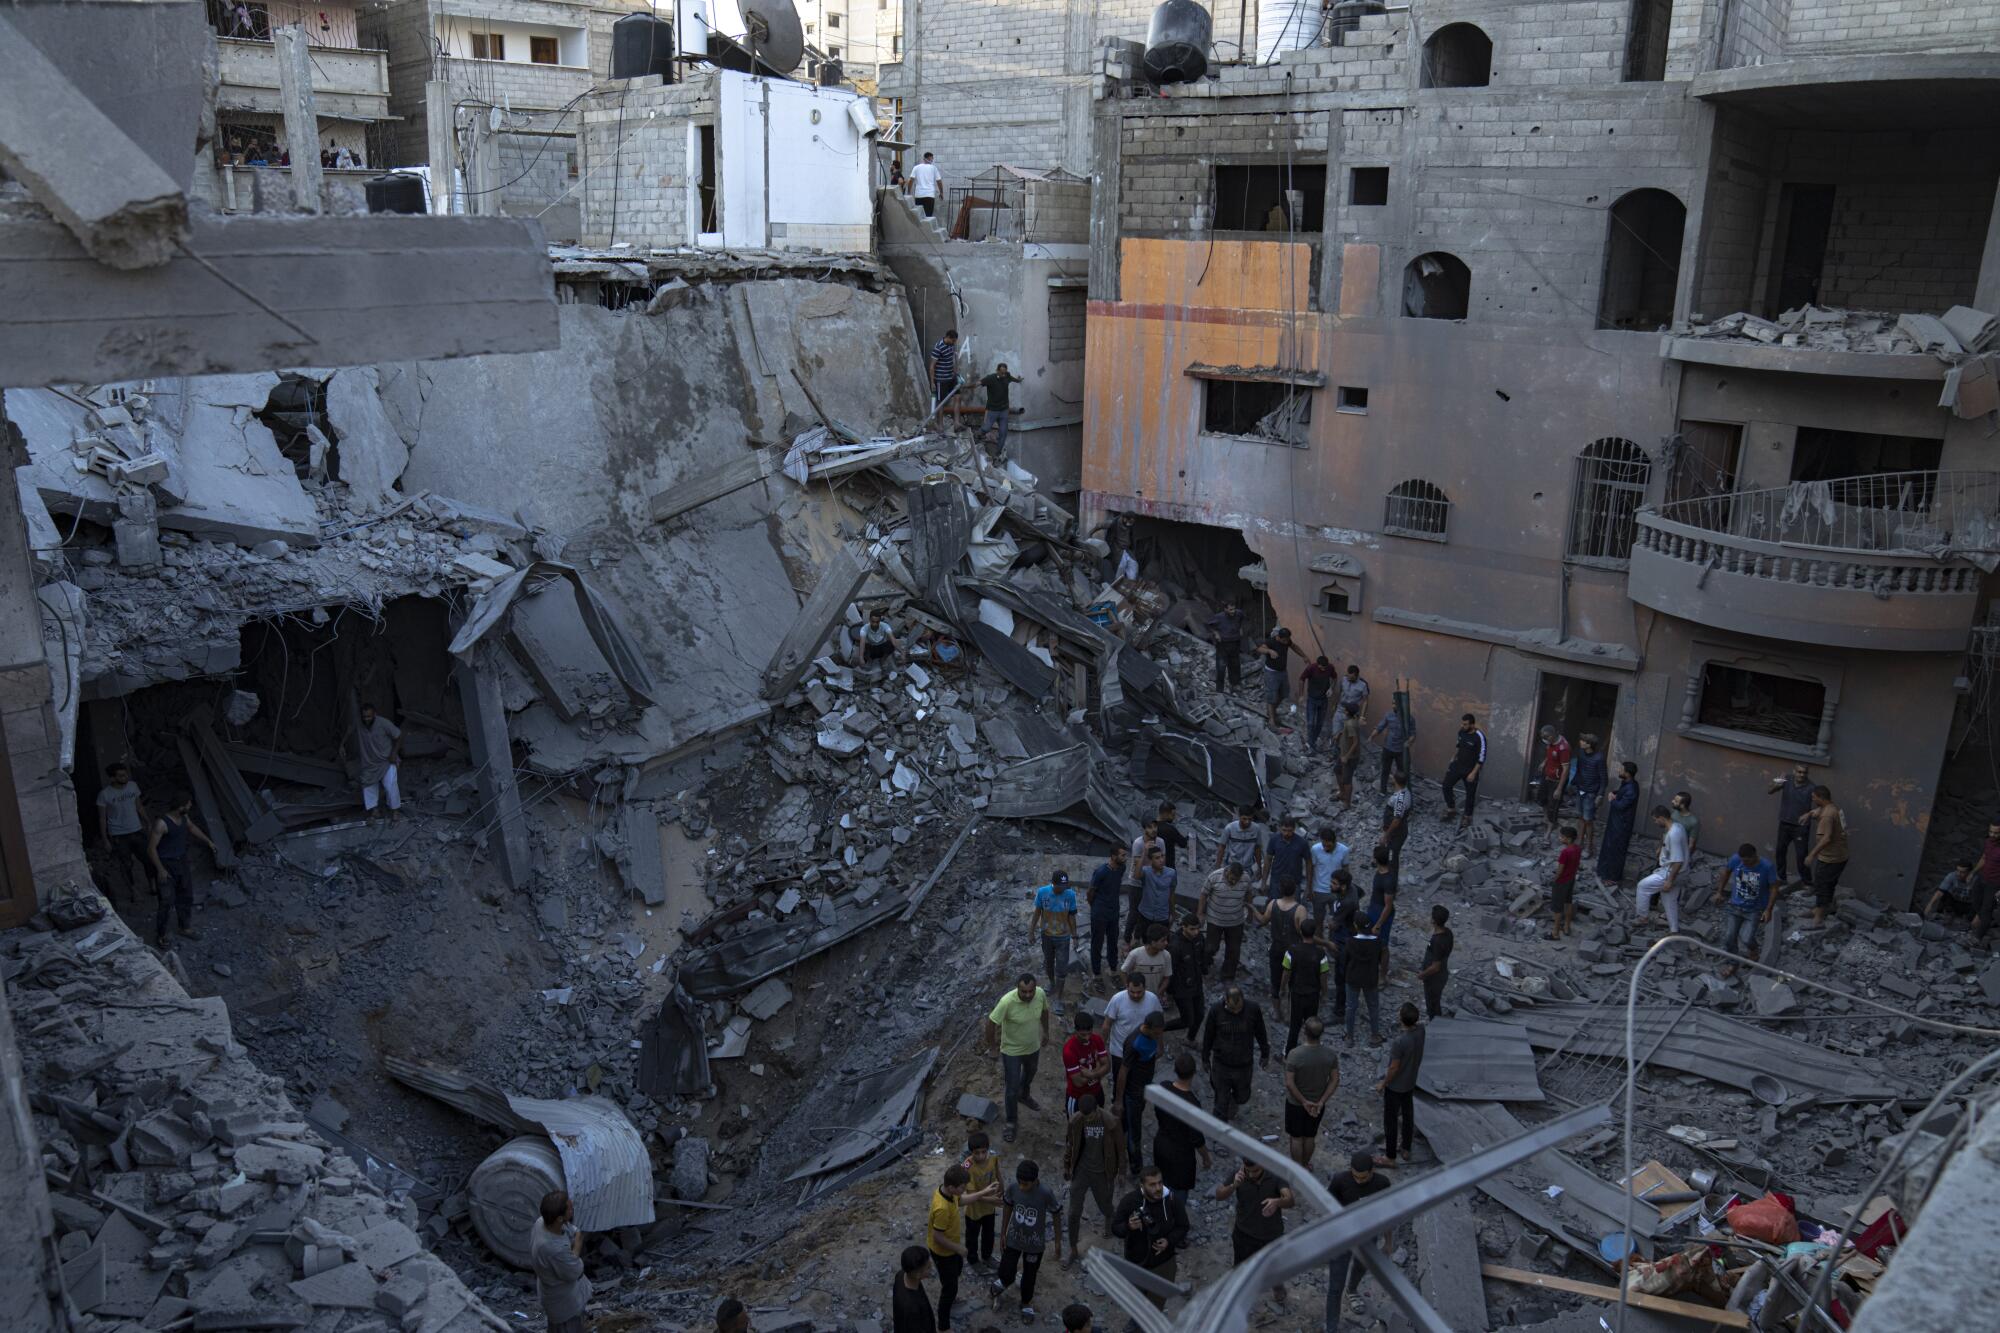 People searching for survivors in the rubble of a building destroyed by Israeli airstrike.